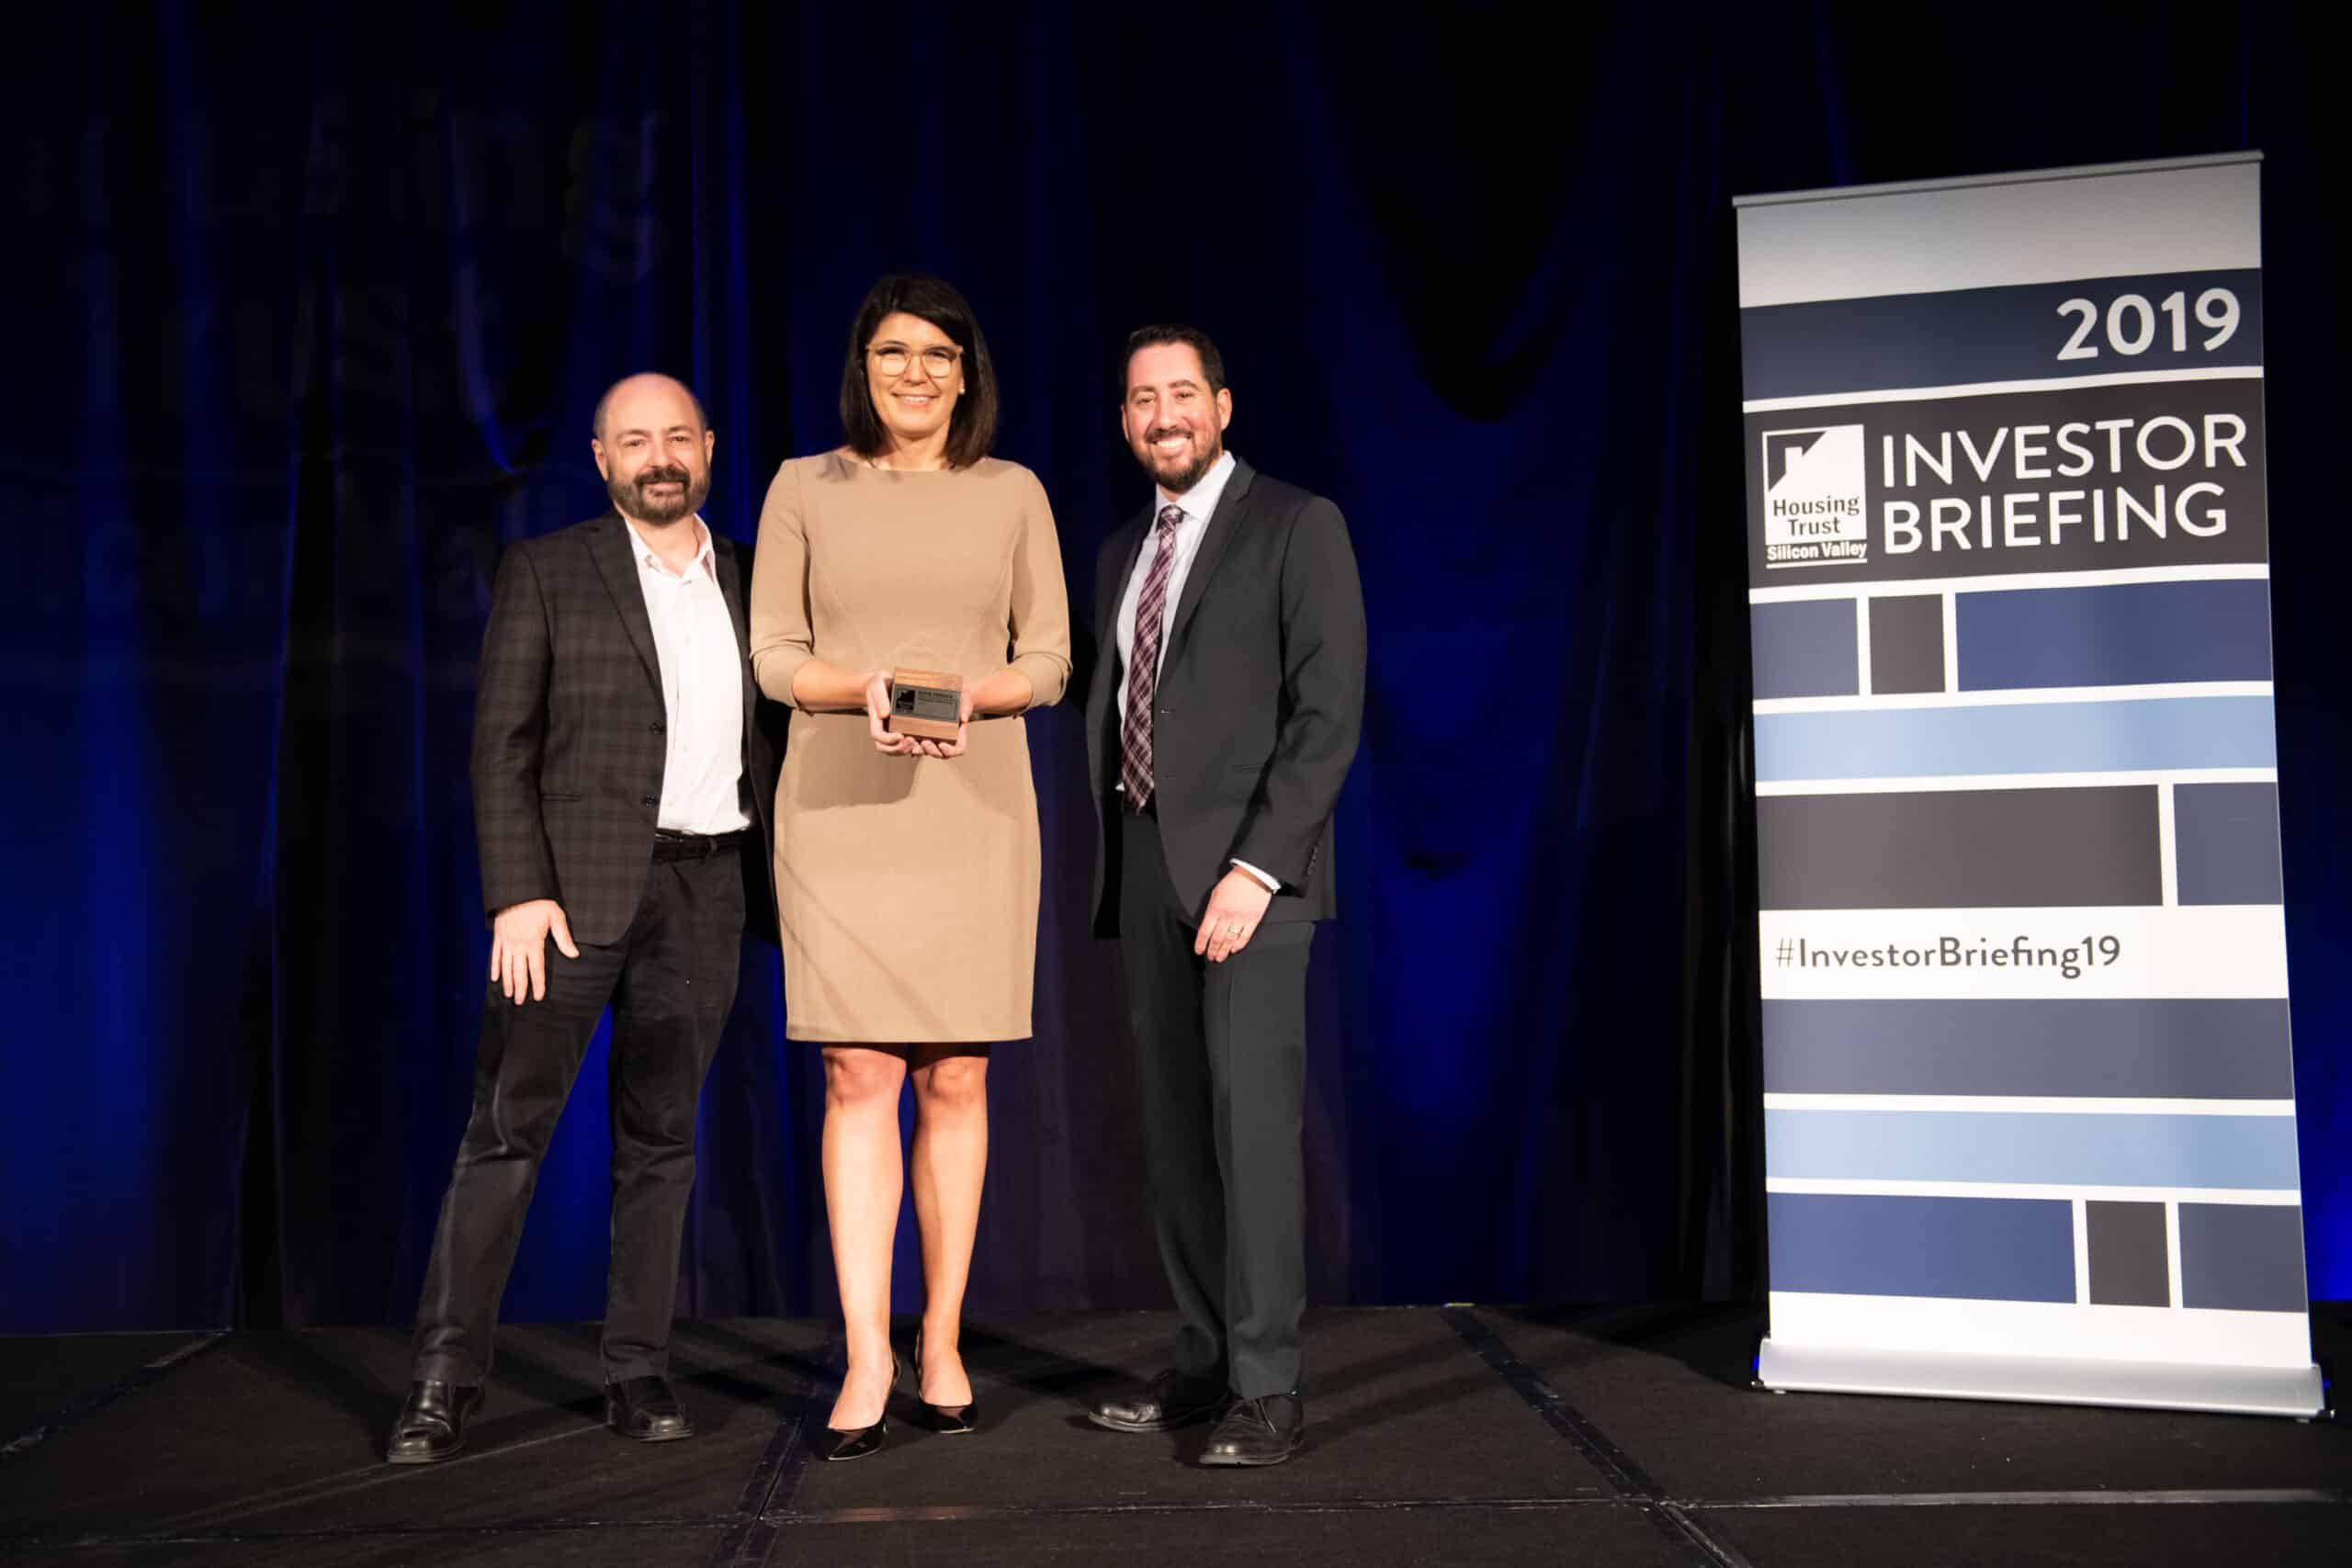 Charlie Giancarlo, CEO of Pure Storage, Katie Ferrick, Sr. Director of Workplace, Community & Environment of LinkedIn, and Kevin Zwick, CEO of Housing Trust Silicon Valley, presenting Katie with the 2019 Housing Champion Award